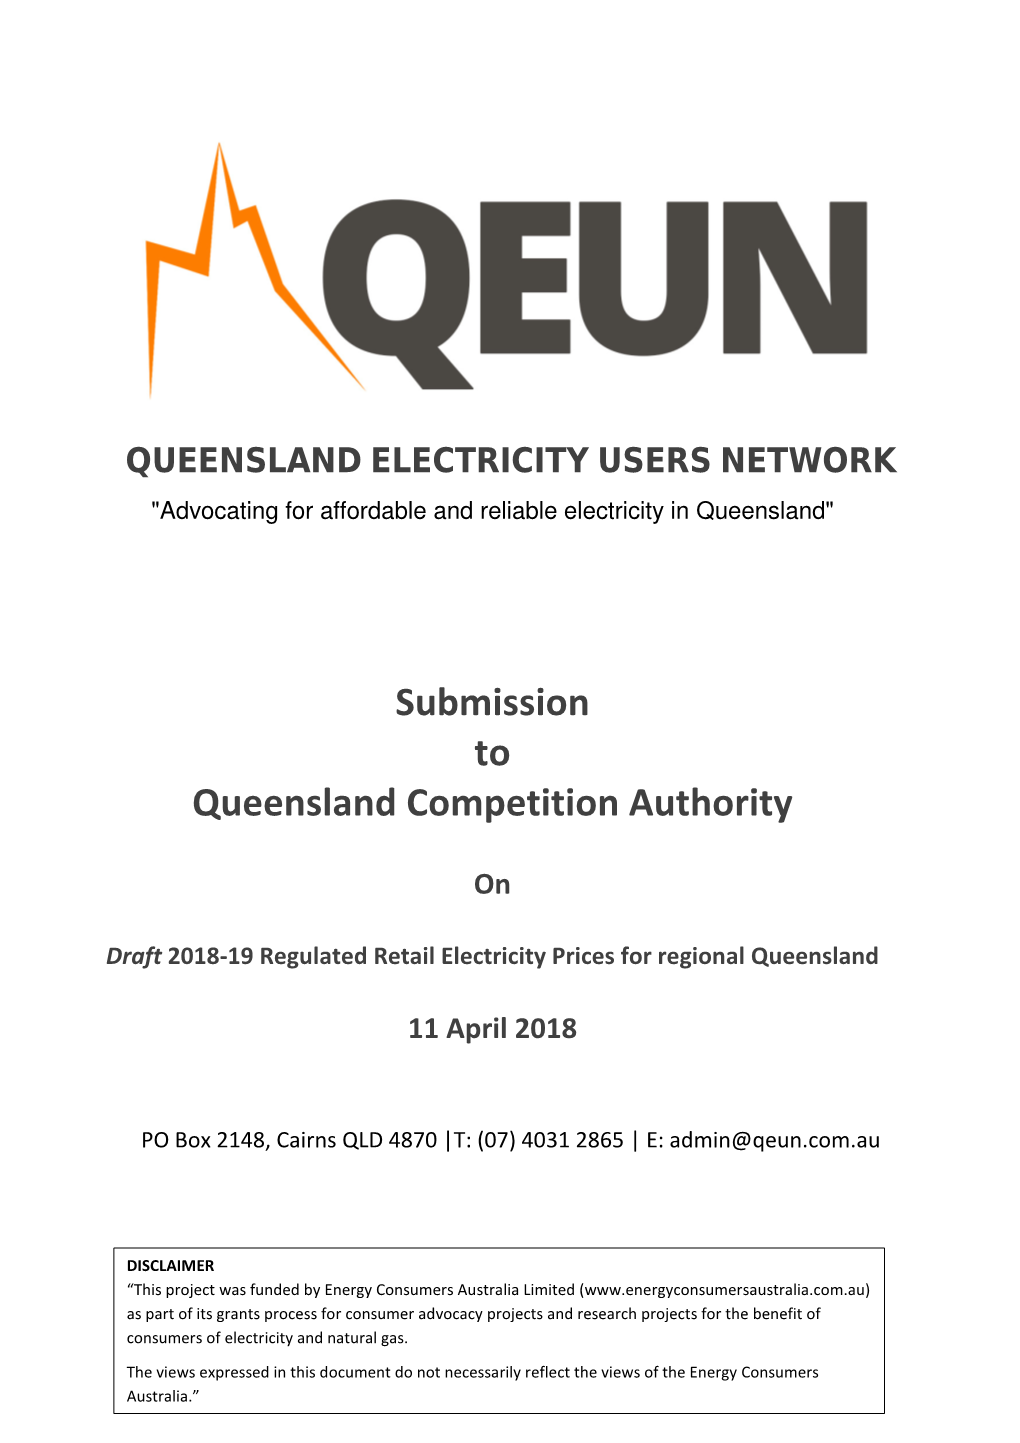 Submission to Queensland Competition Authority